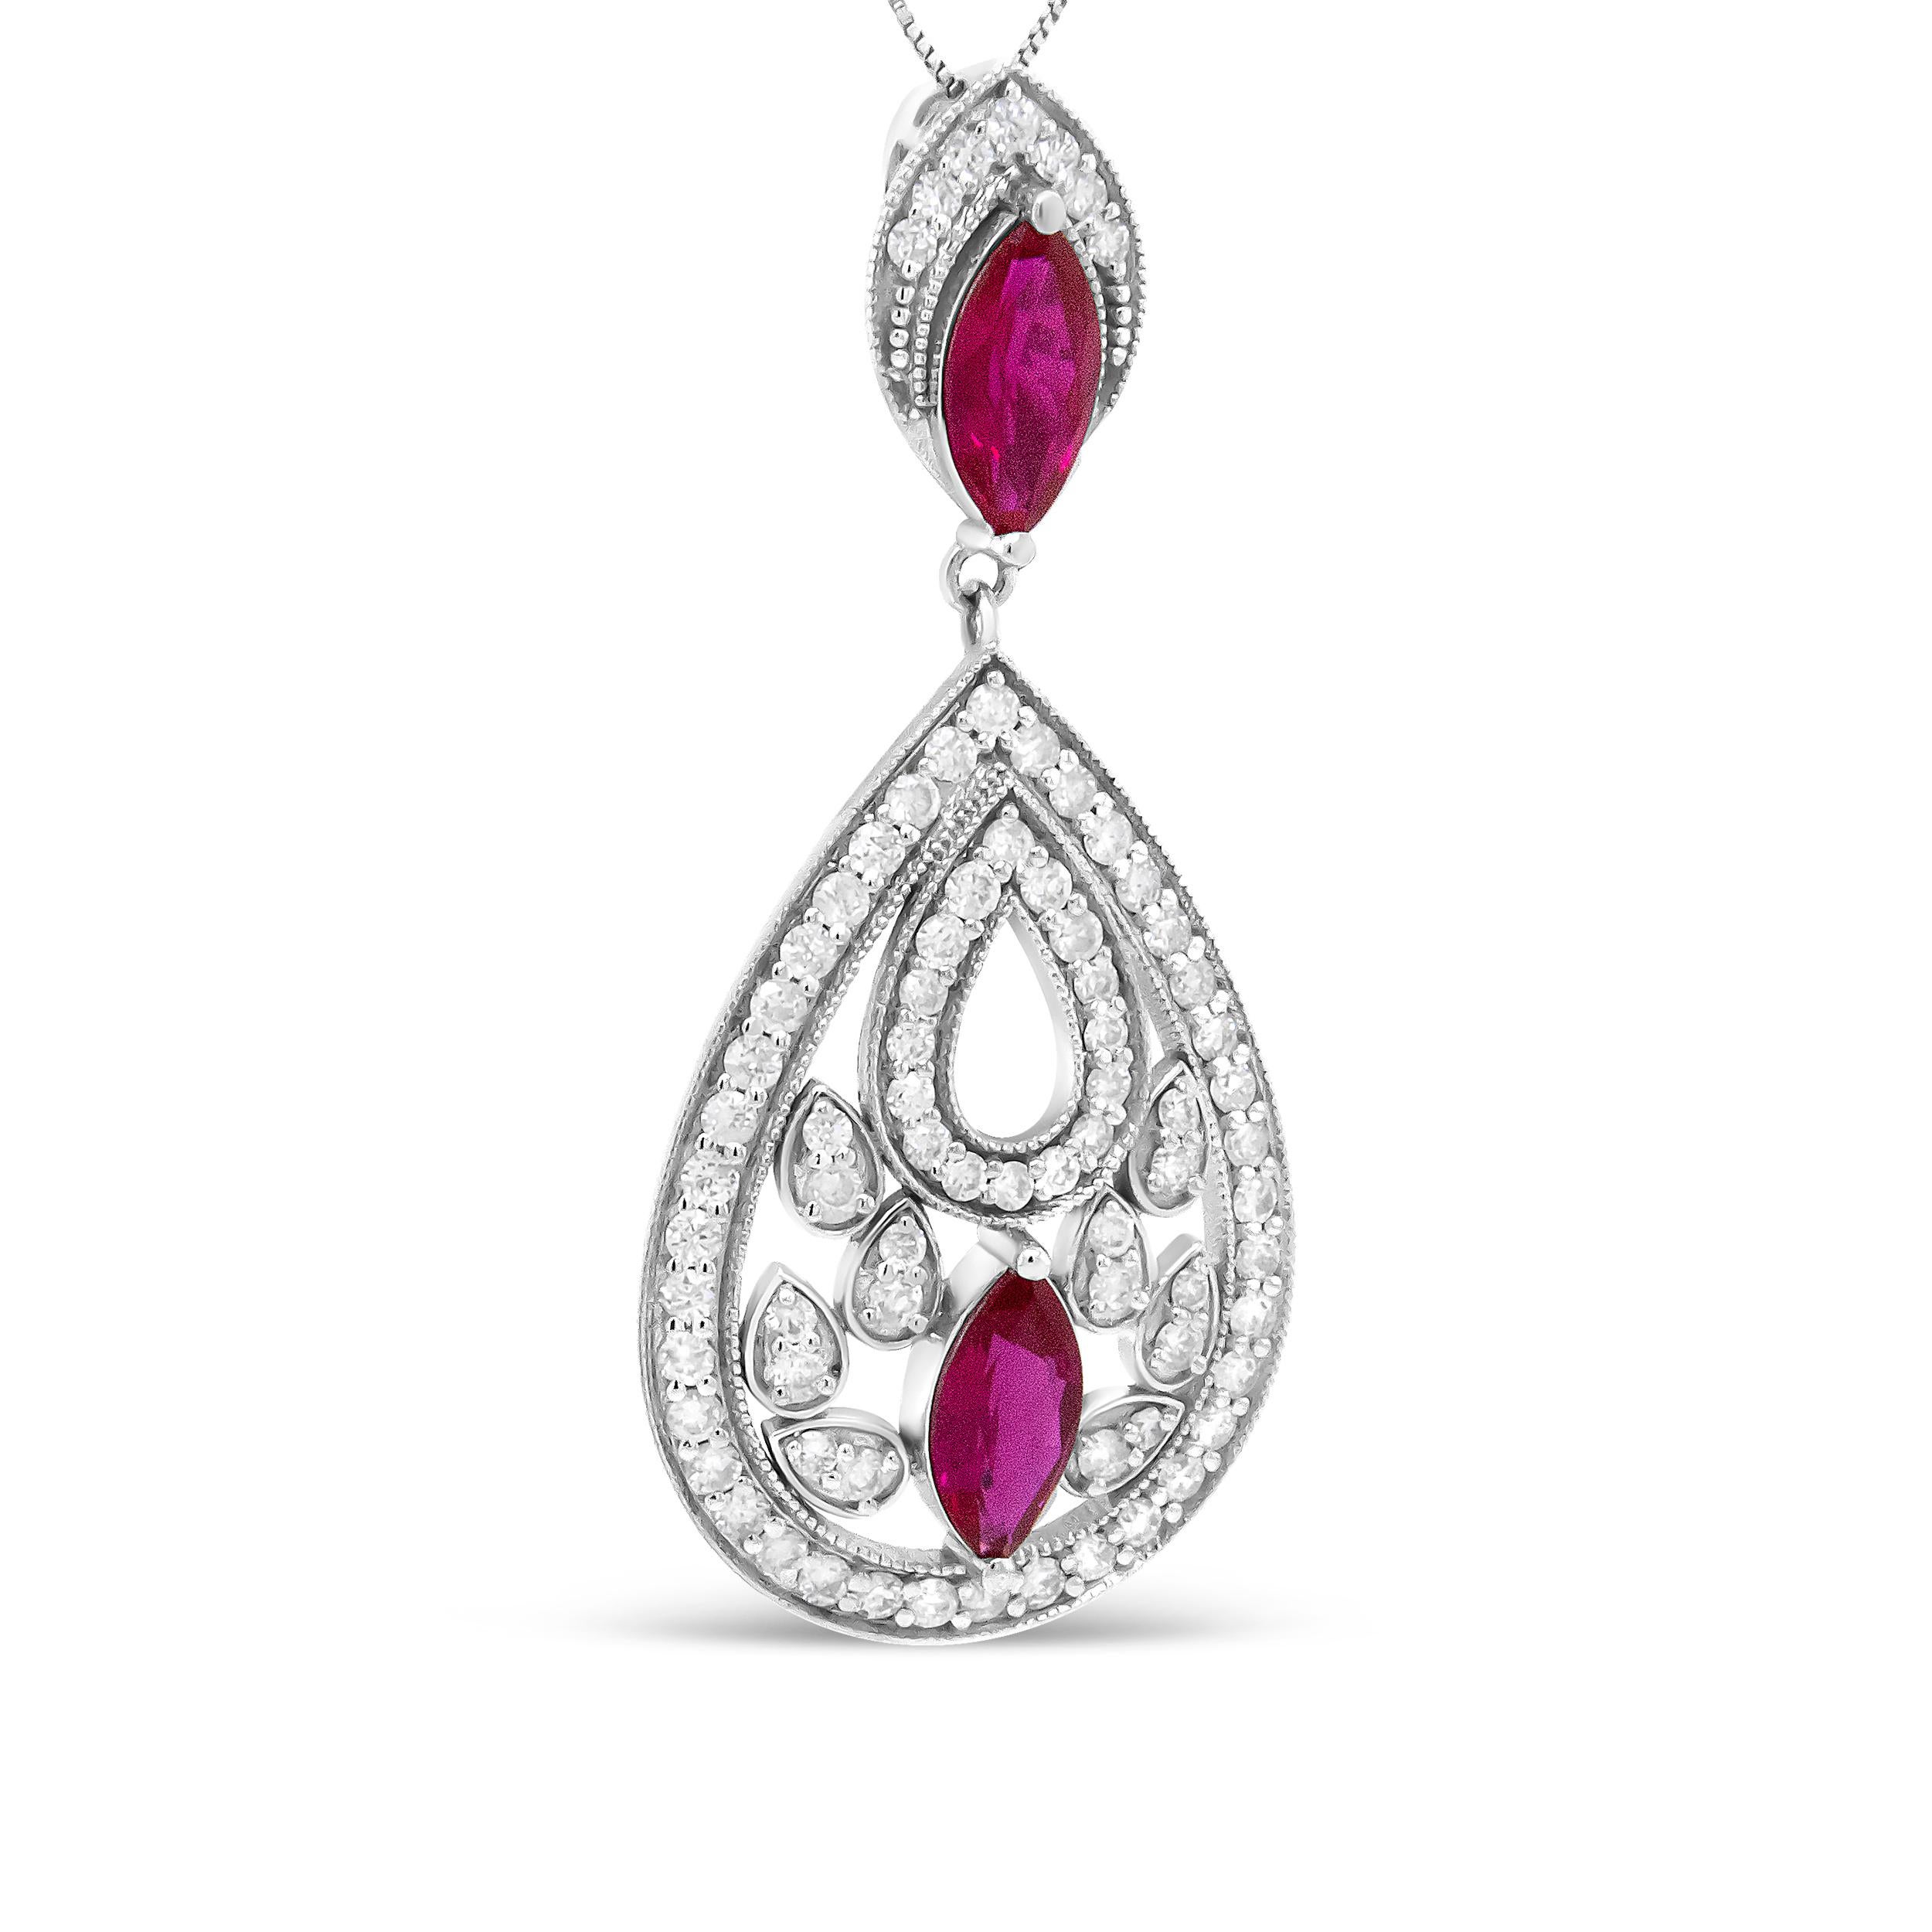 A romantic look that glistens with the natural beauty of gemstones and diamonds, this 18k white gold pendant necklace is swoon-worthy. A total 1.00 cttw prong-set diamonds with an approximate G-H Color and I1-I2 Clarity sparkle throughout this